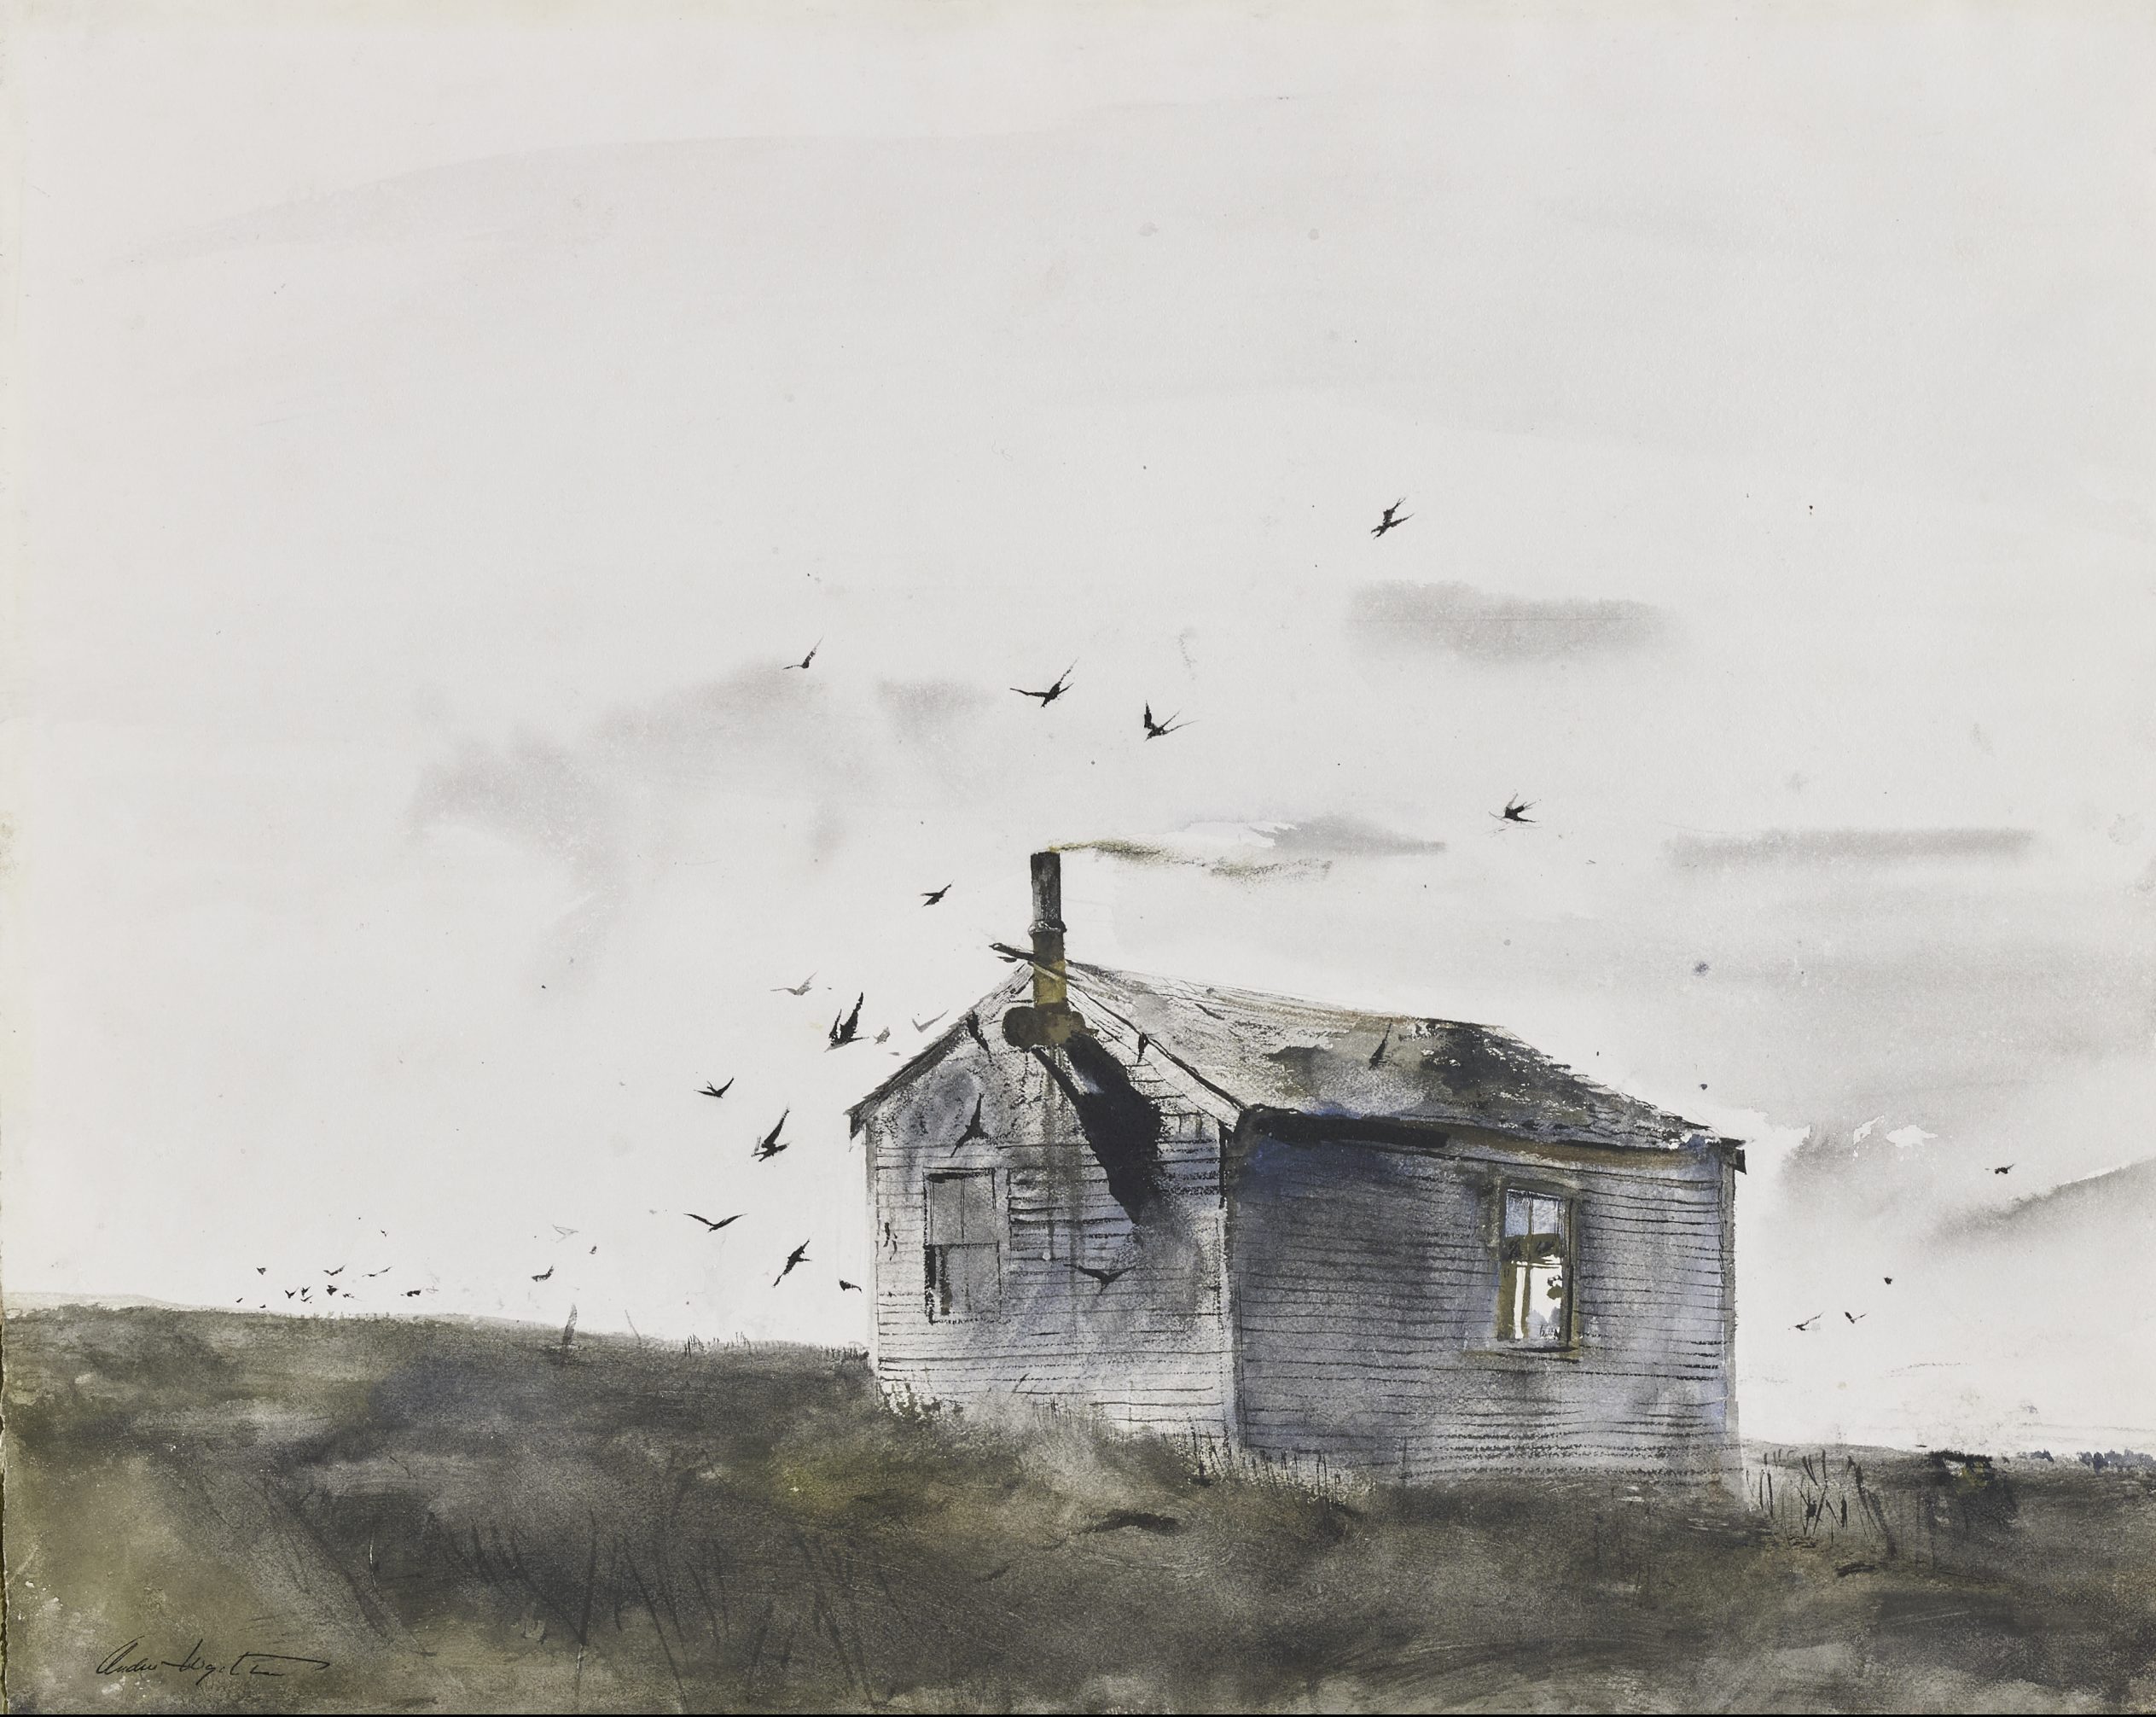 Andrew Wyeth, Bert’s Cabin, 1949, watercolor and ink on paper